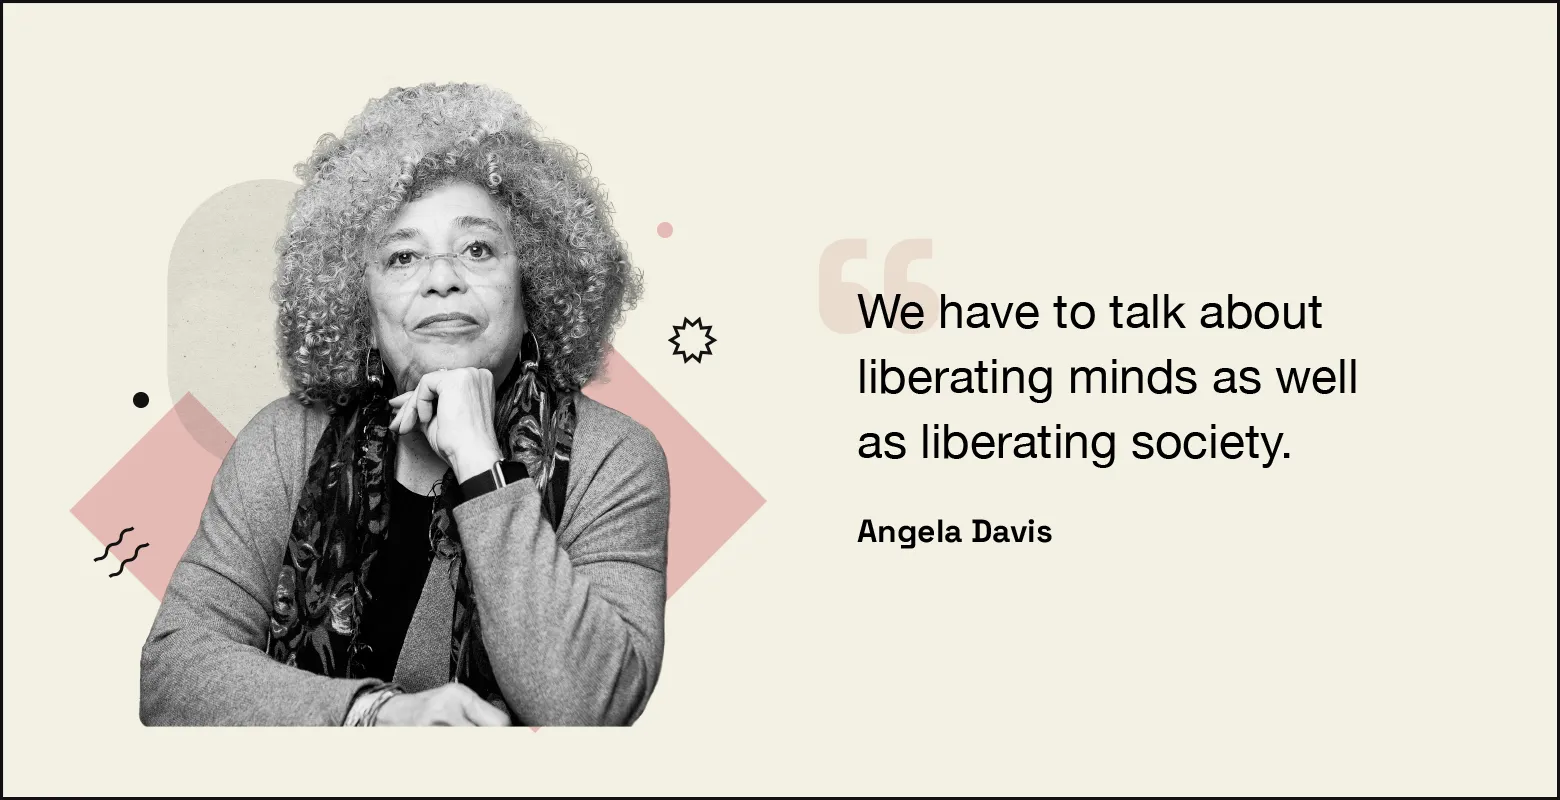 “We have to talk about liberating minds as well as liberating society.” — Angela Davis.